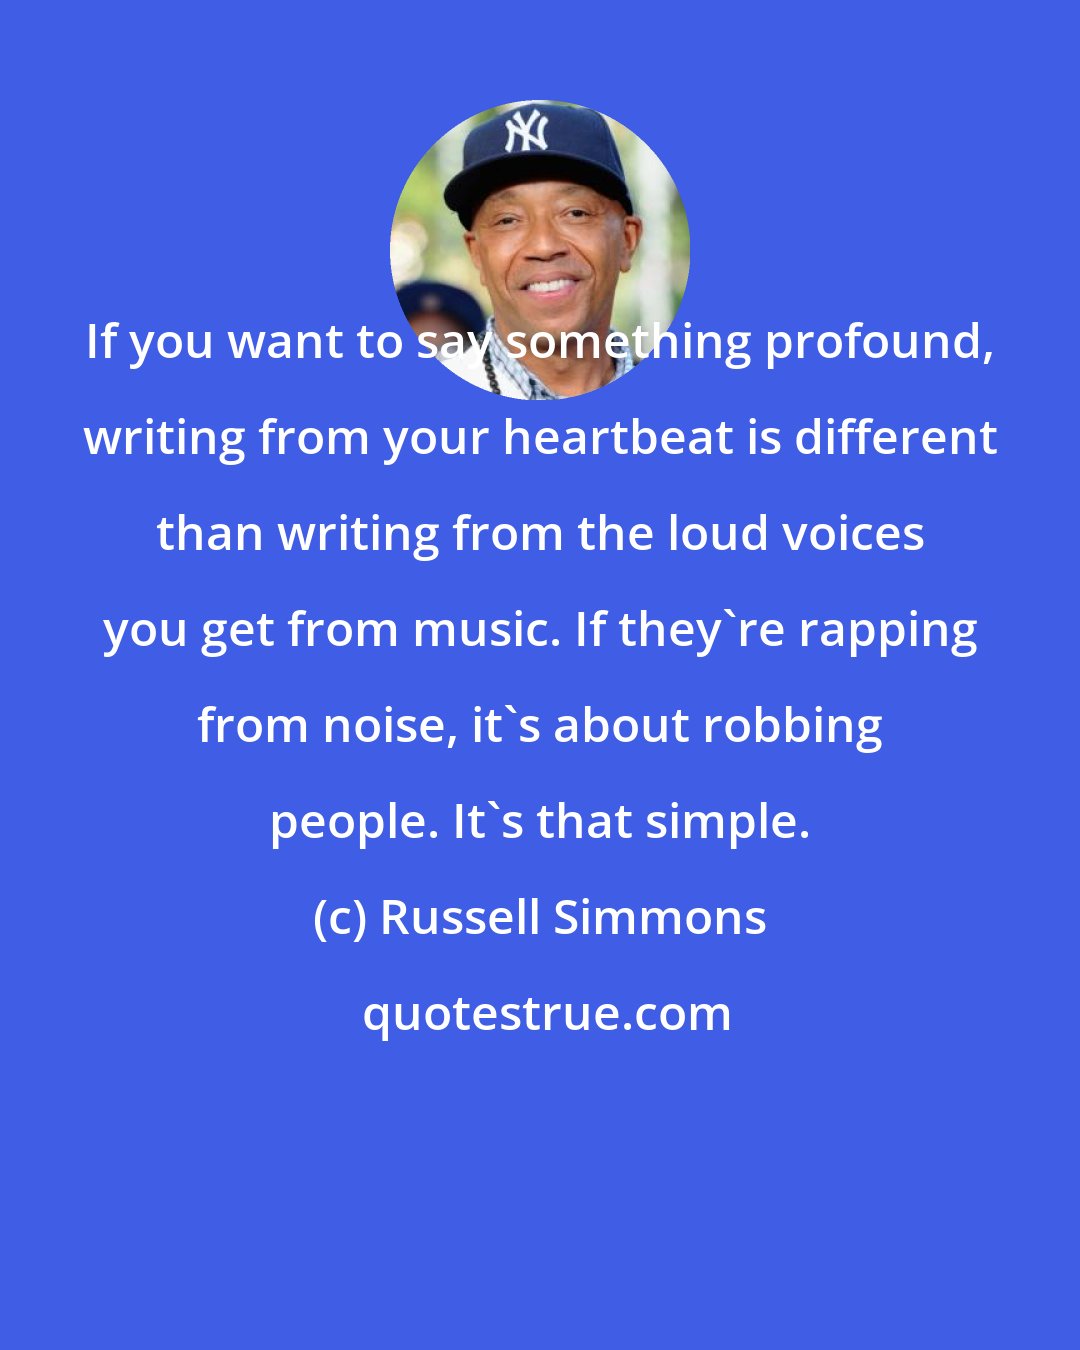 Russell Simmons: If you want to say something profound, writing from your heartbeat is different than writing from the loud voices you get from music. If they're rapping from noise, it's about robbing people. It's that simple.